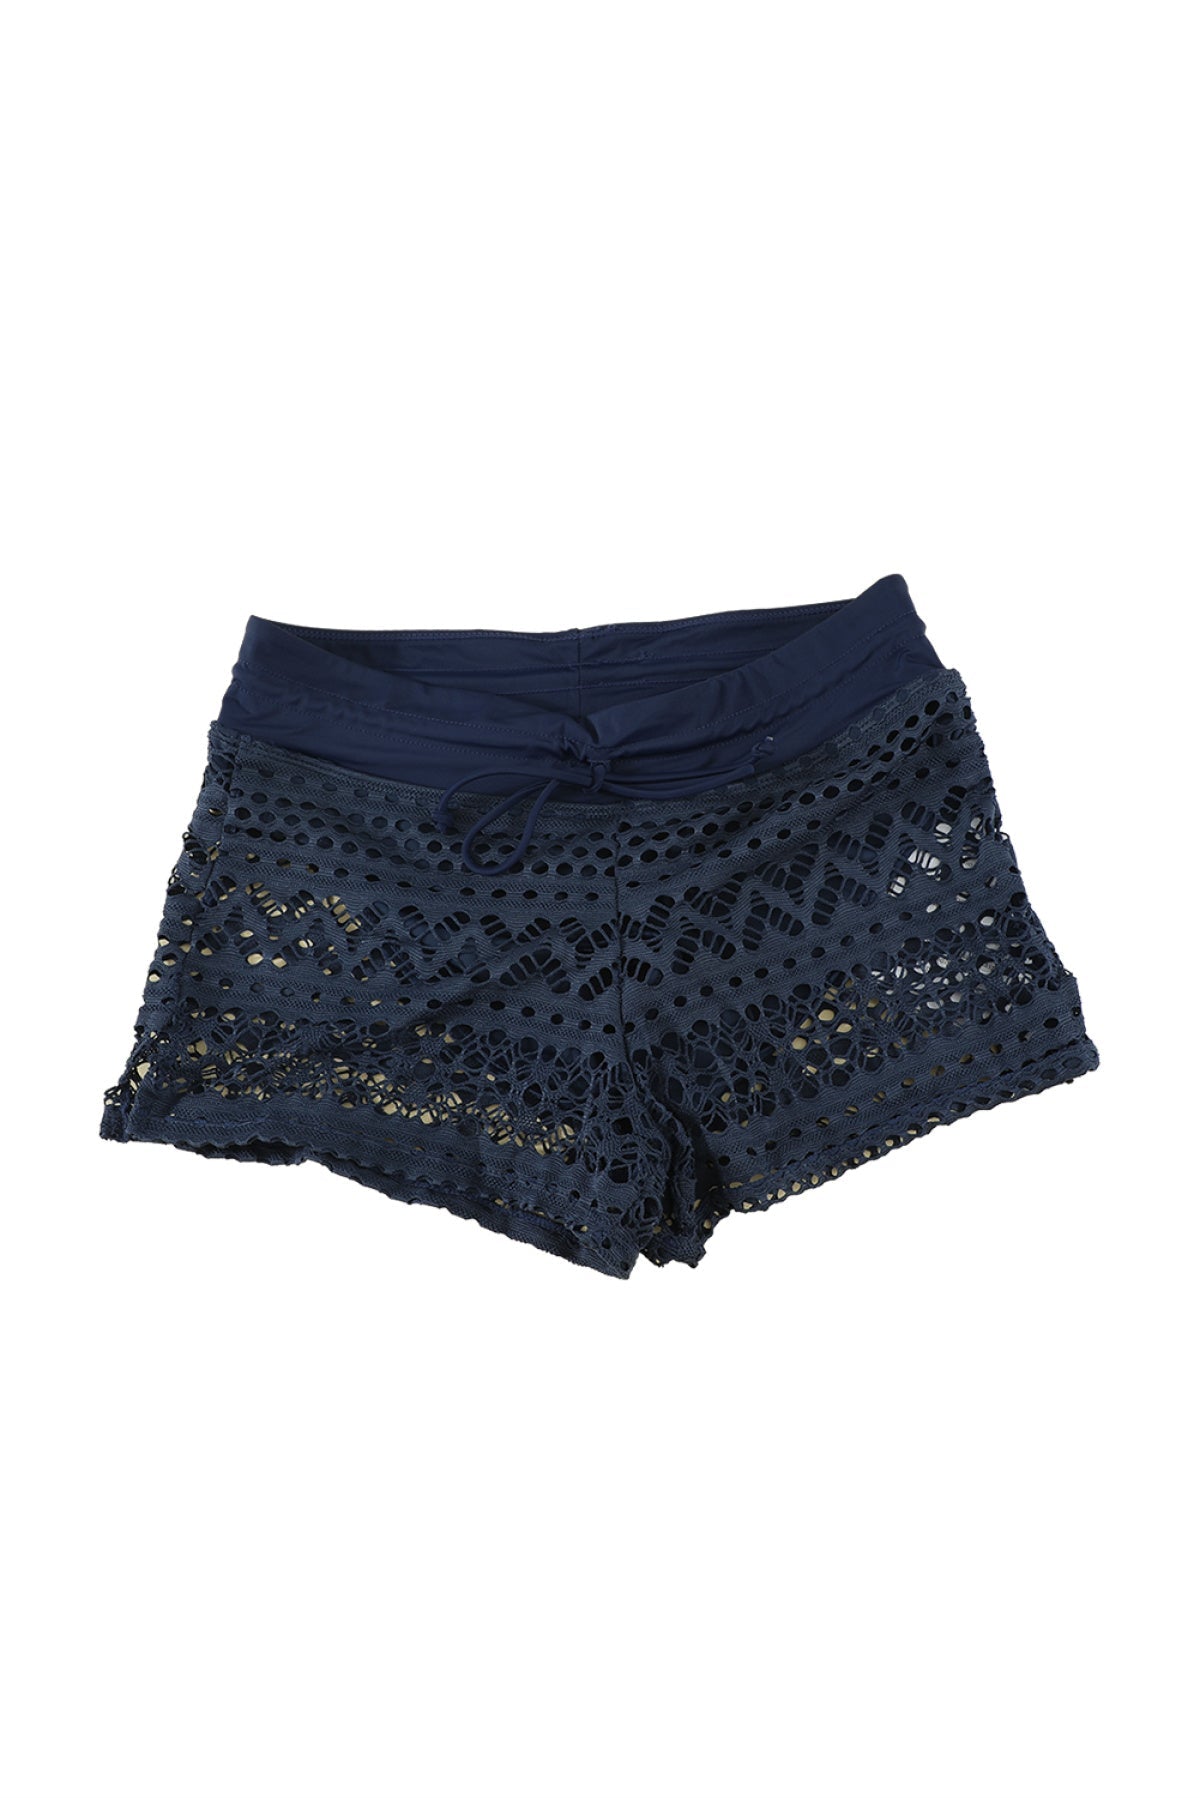 Lace Shorts Attached Swim Bottom